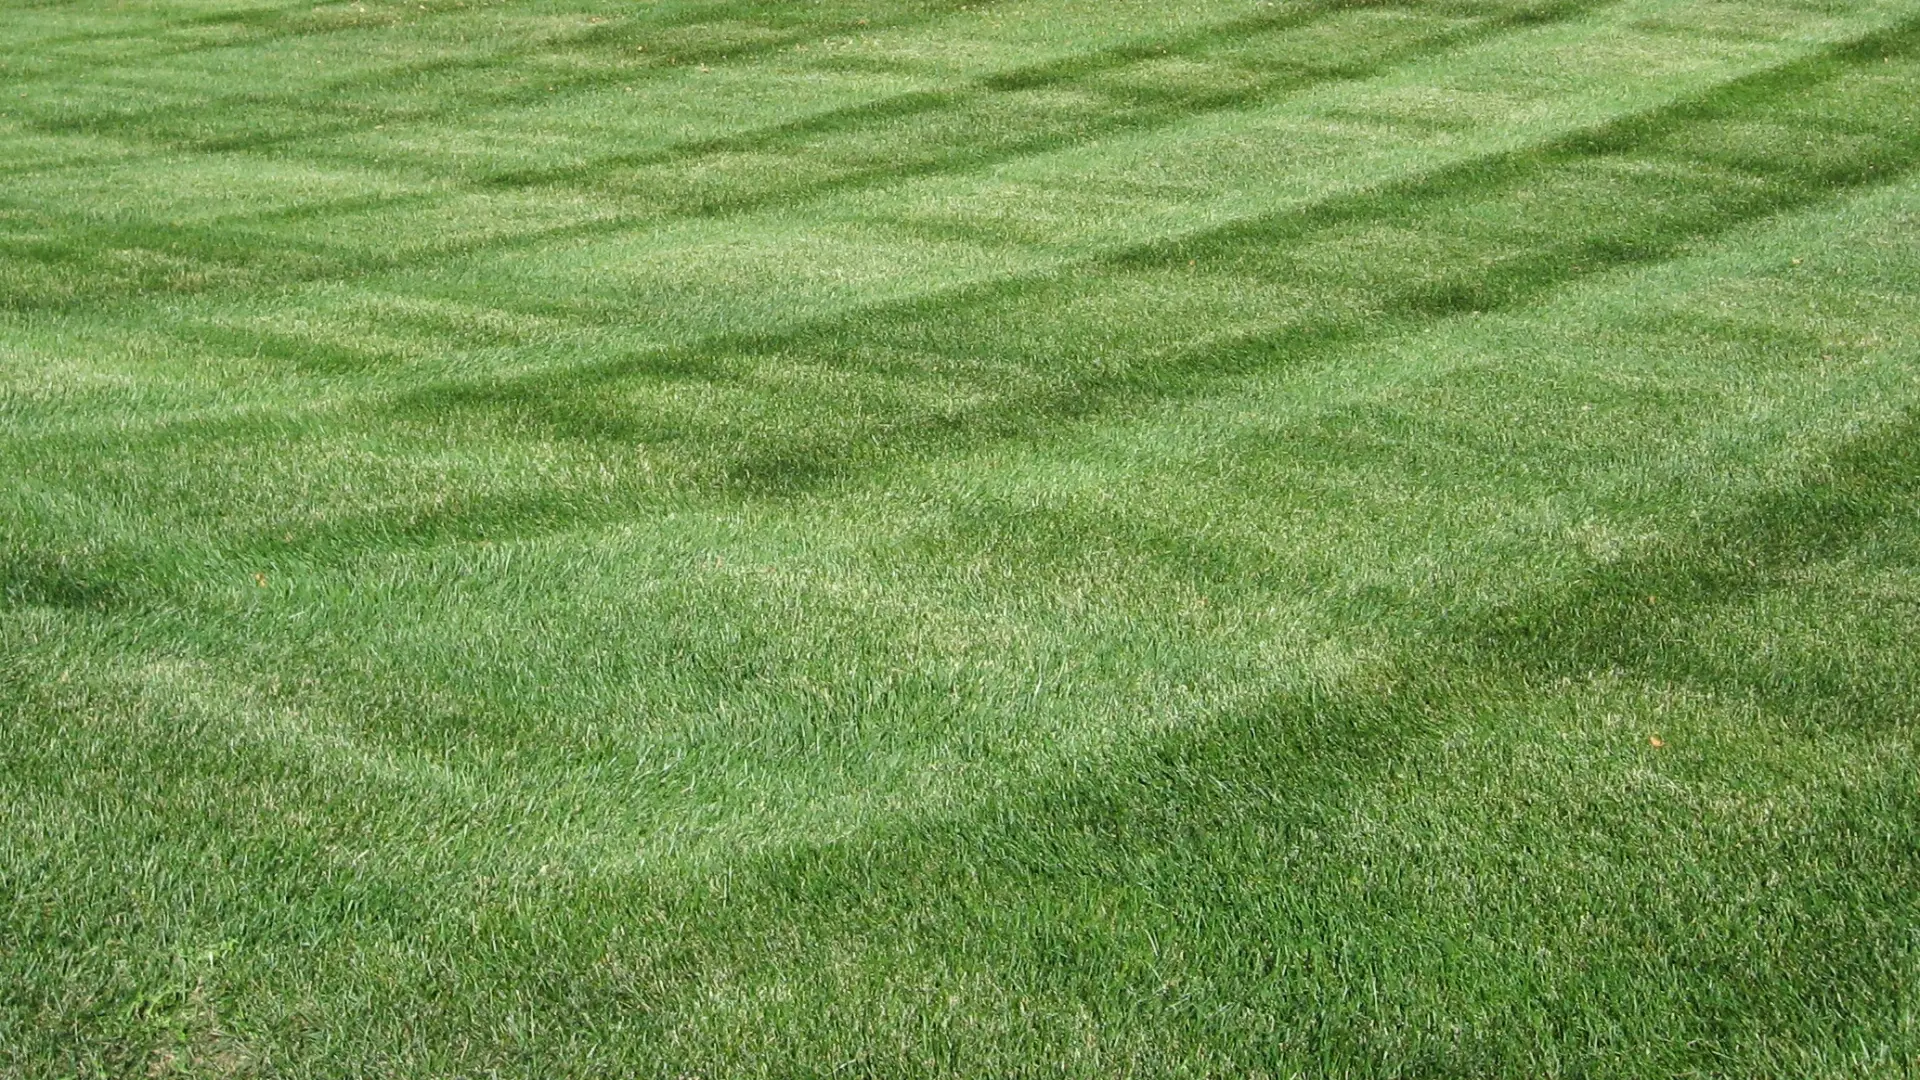 Fertilizing Your Lawn Too Early in Spring Can Be a Waste of Time & Money